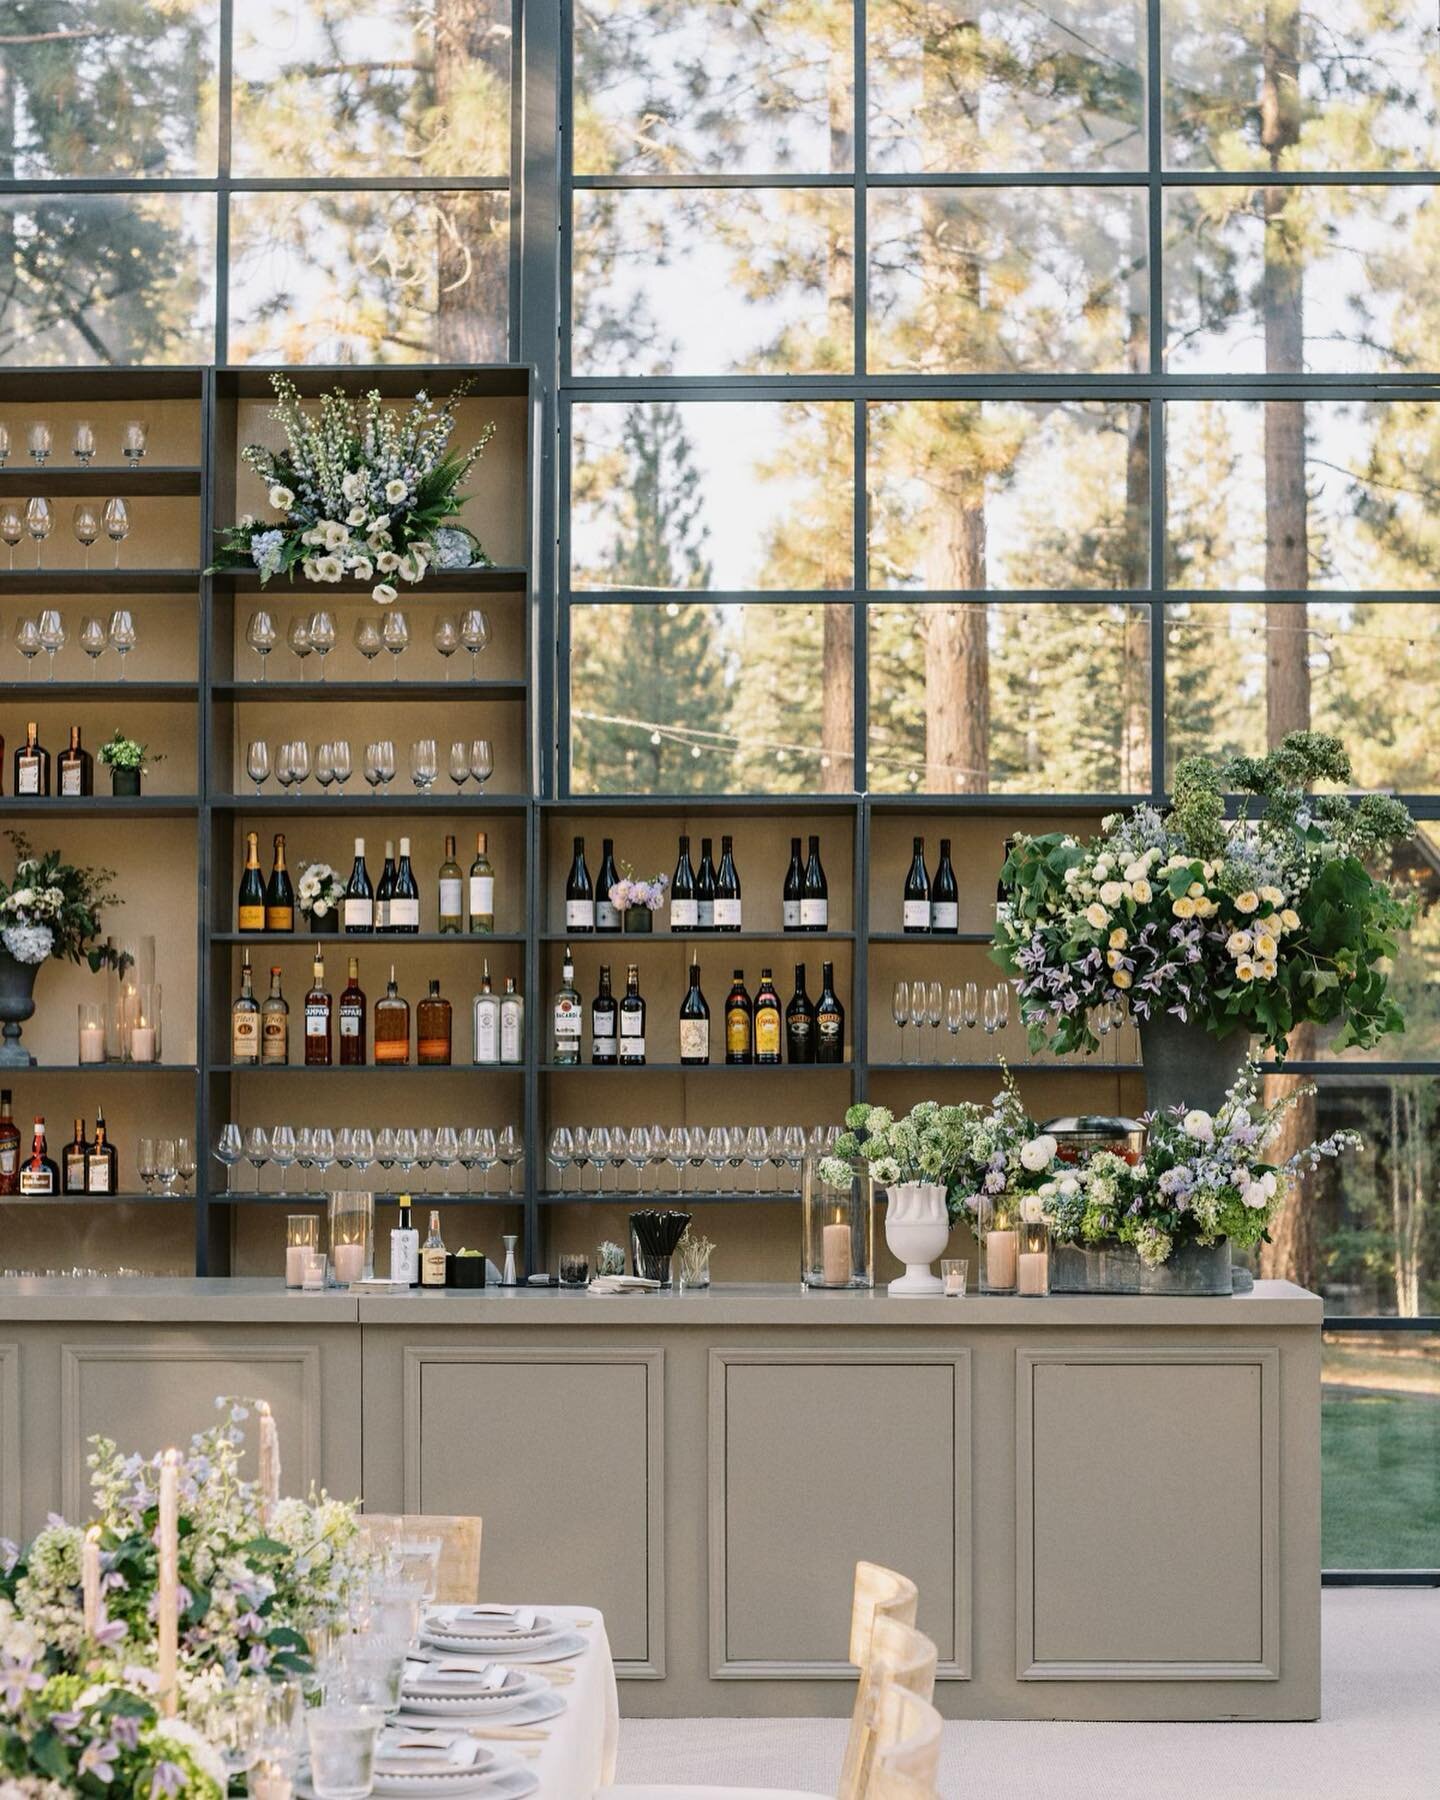 We had so much fun dreaming up this bar with @mindyricedesign and @hensleyeventresources ! The design was meant to feel as an extension of the atrium structure!

C R E A T I V E  T E A M
PHOTOGRAPHY | @imryanray 
PLANNING + DESIGN | @eliseevents 
FLO